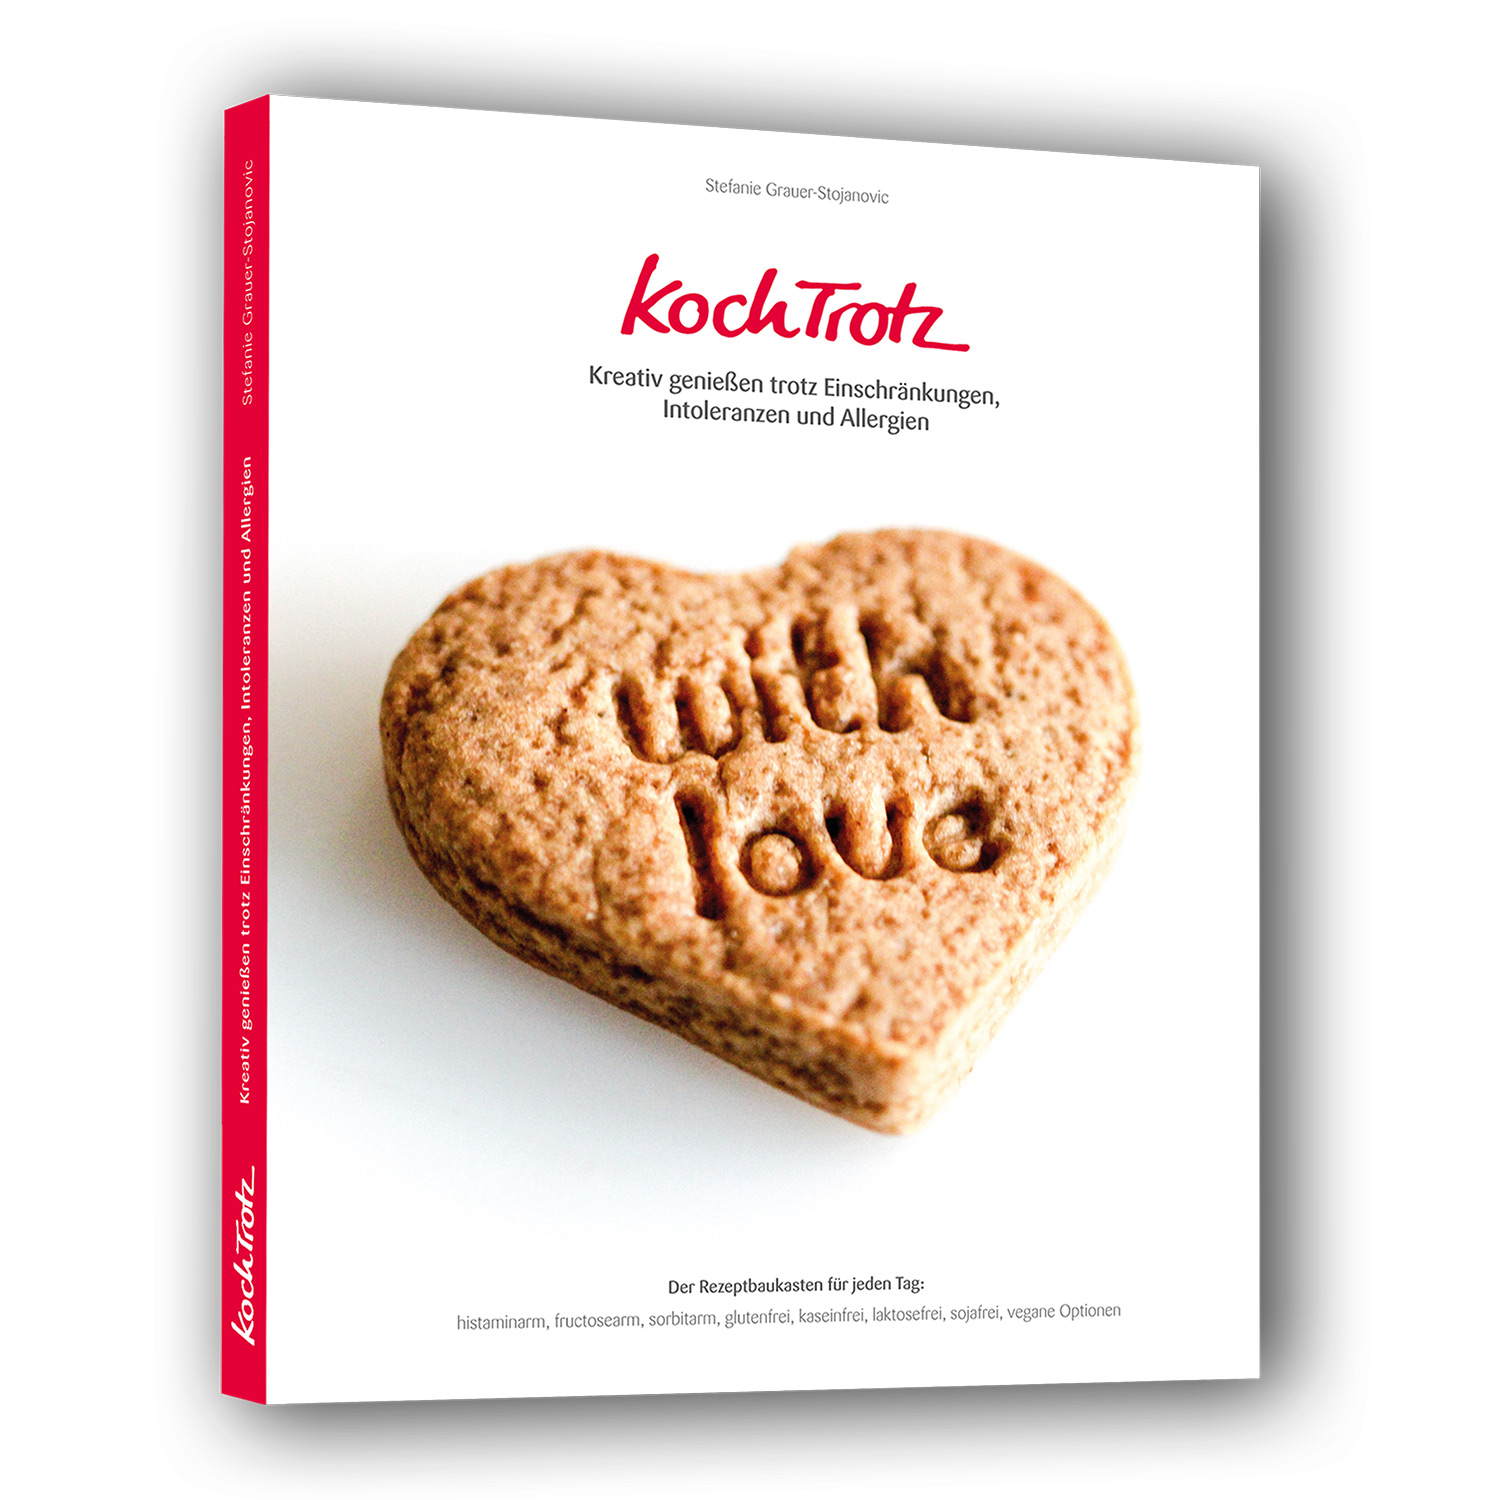 KochTrotz Kochbuch Band 1 - "with love"